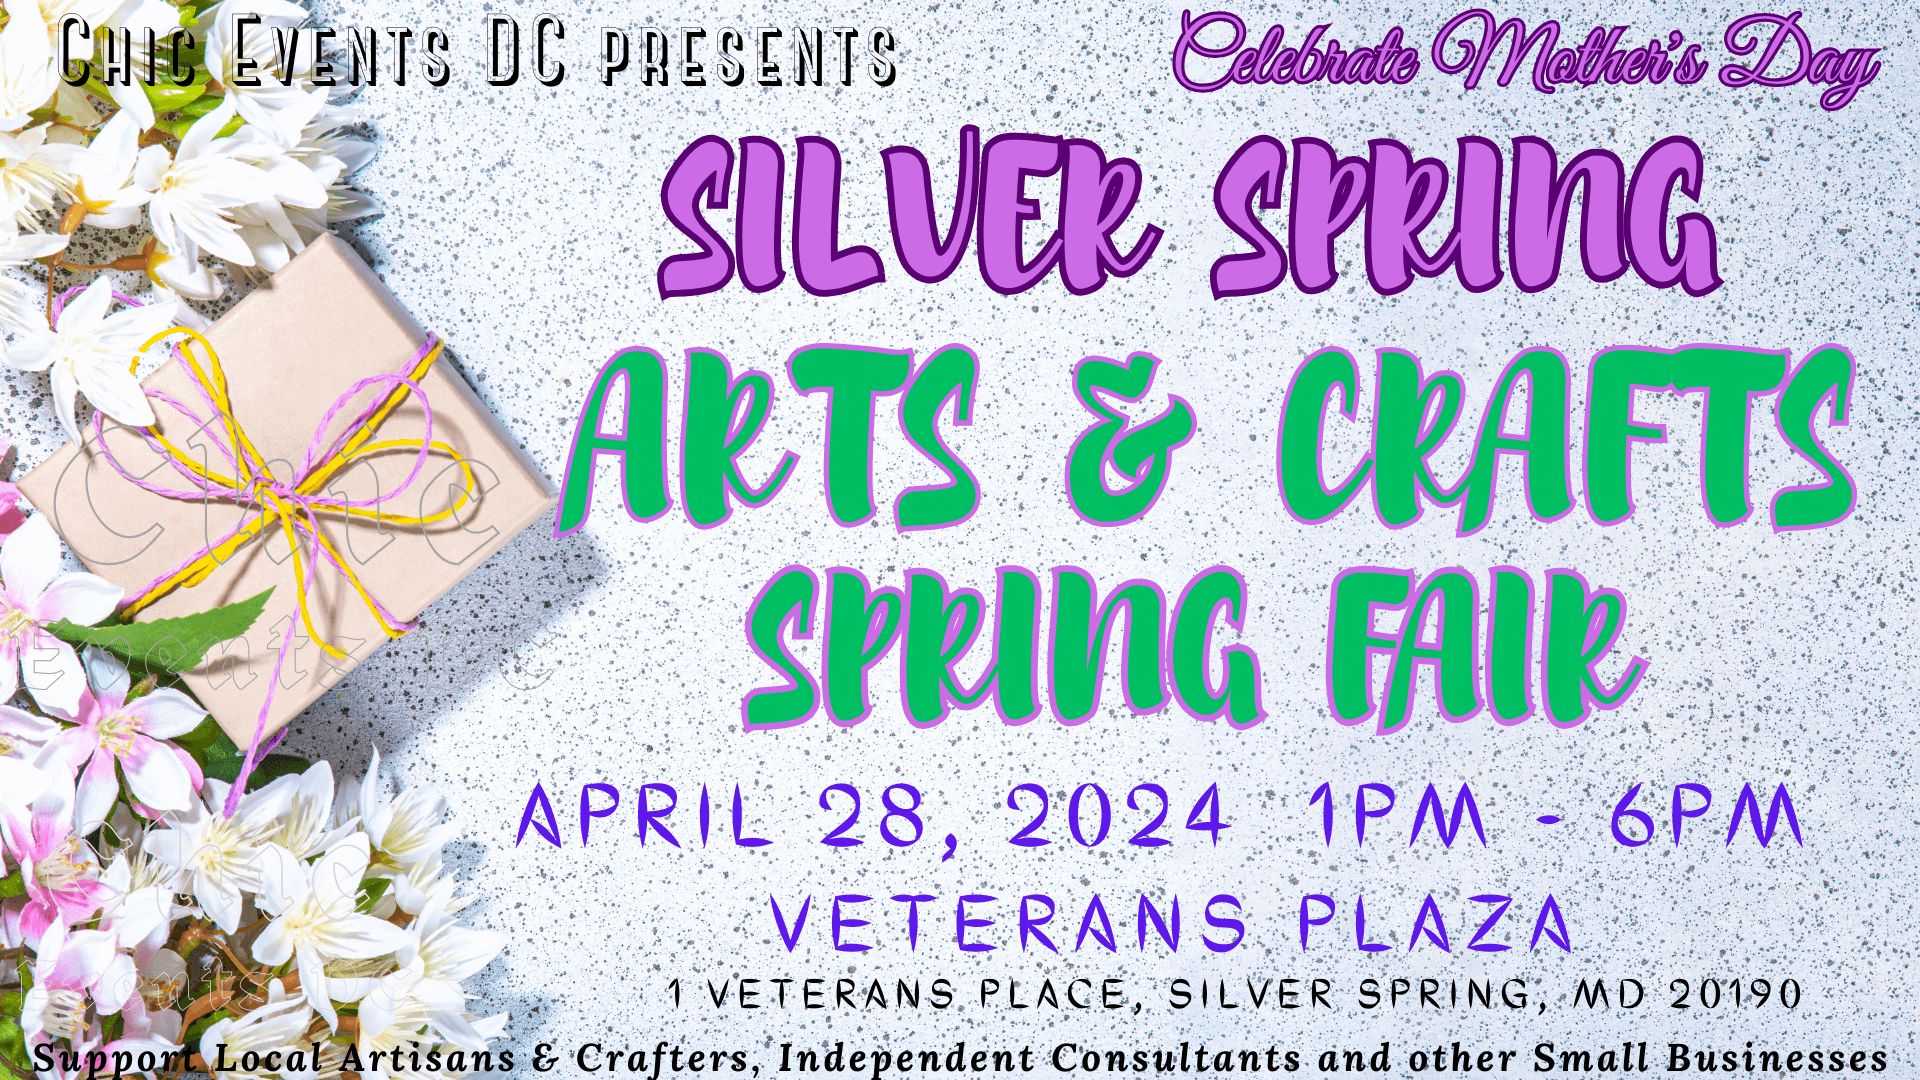 Silver Spring Mother's Day Arts and Crafts Spring Fair @ Veterans Plaza, Silver Spring, Maryland, United States